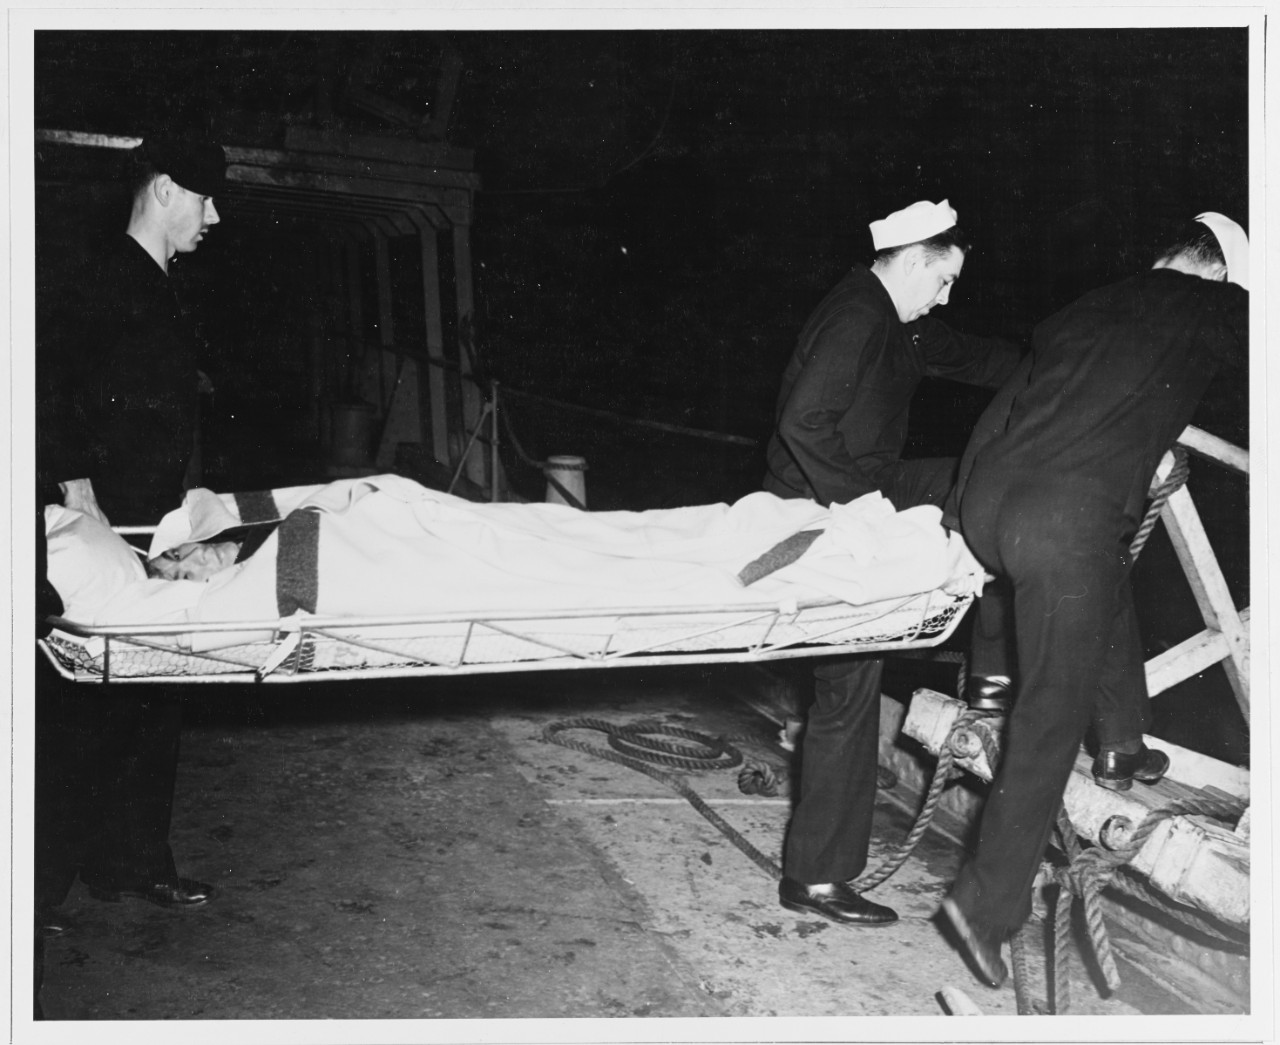 Survivor of the Brazilian ship "BUARQUE" carried on a stretcher